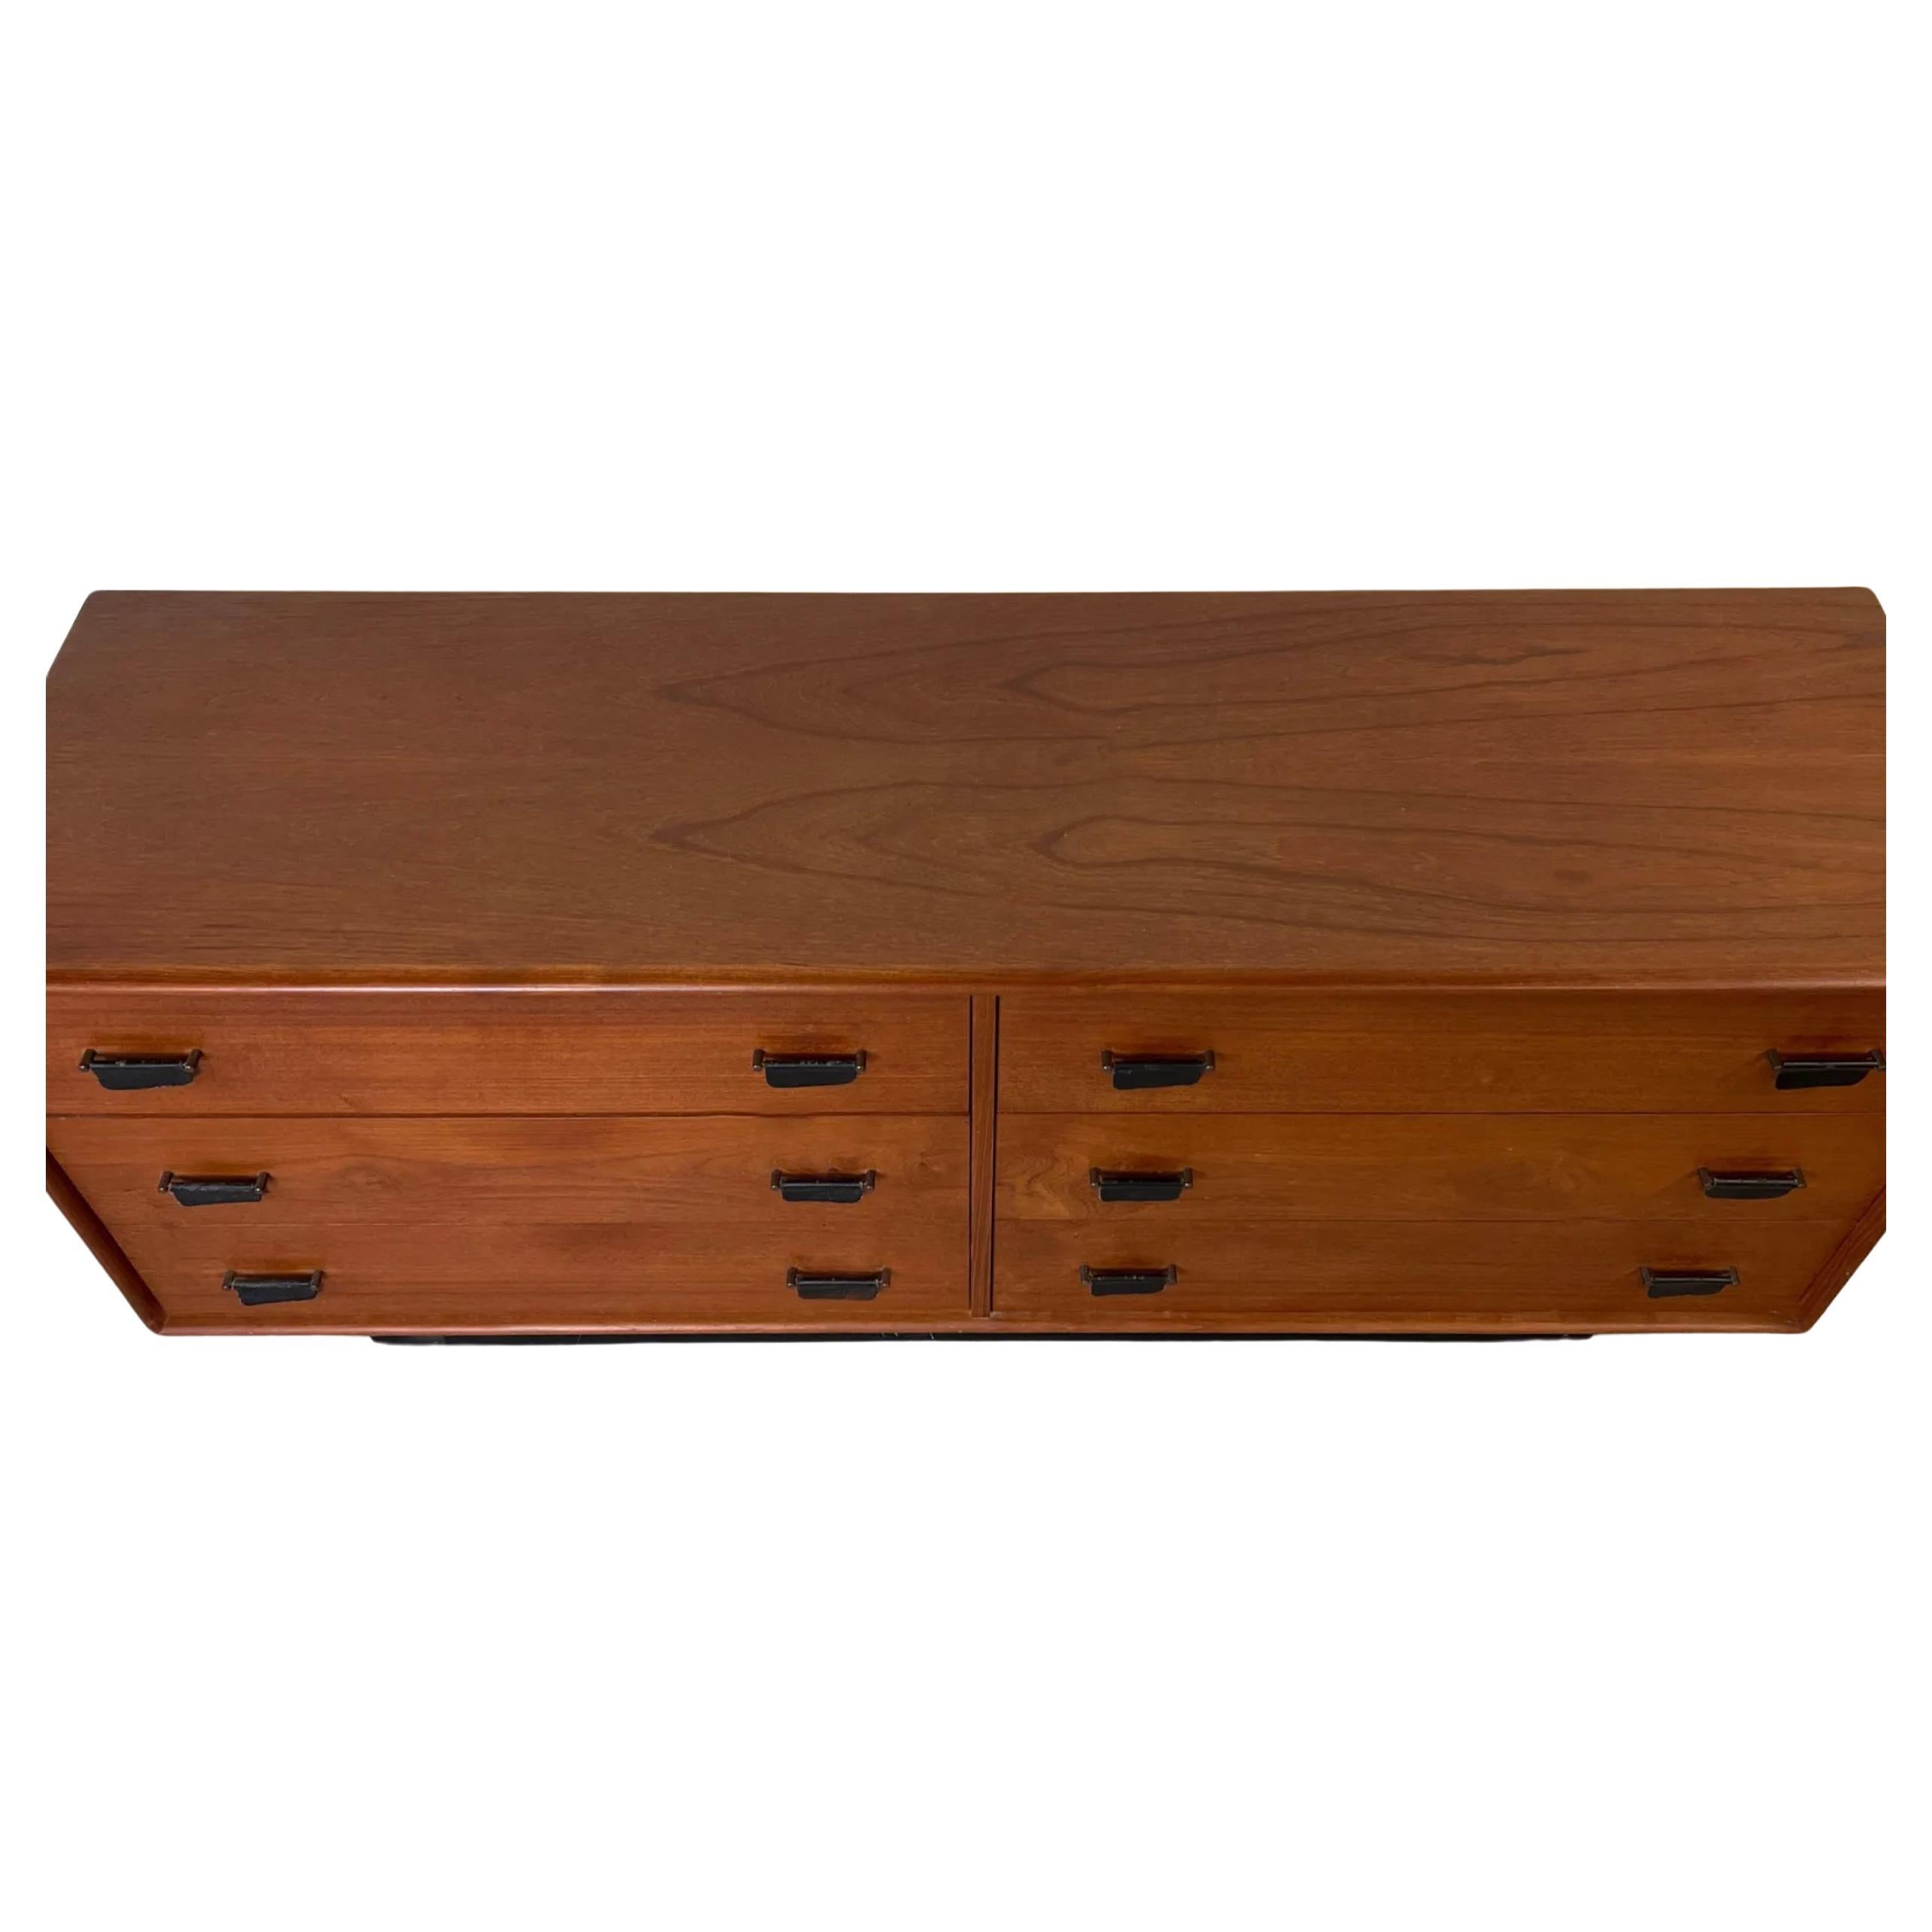 Mid Century Scandinavian Modern Teak low 6 drawer dresser with leather pulls and Black Lacquer plinth base. Very unique Teak Dresser or Credenza with hanging leather pull handles. Solid wood drawer construction with dovetail joints. Clean dresser in